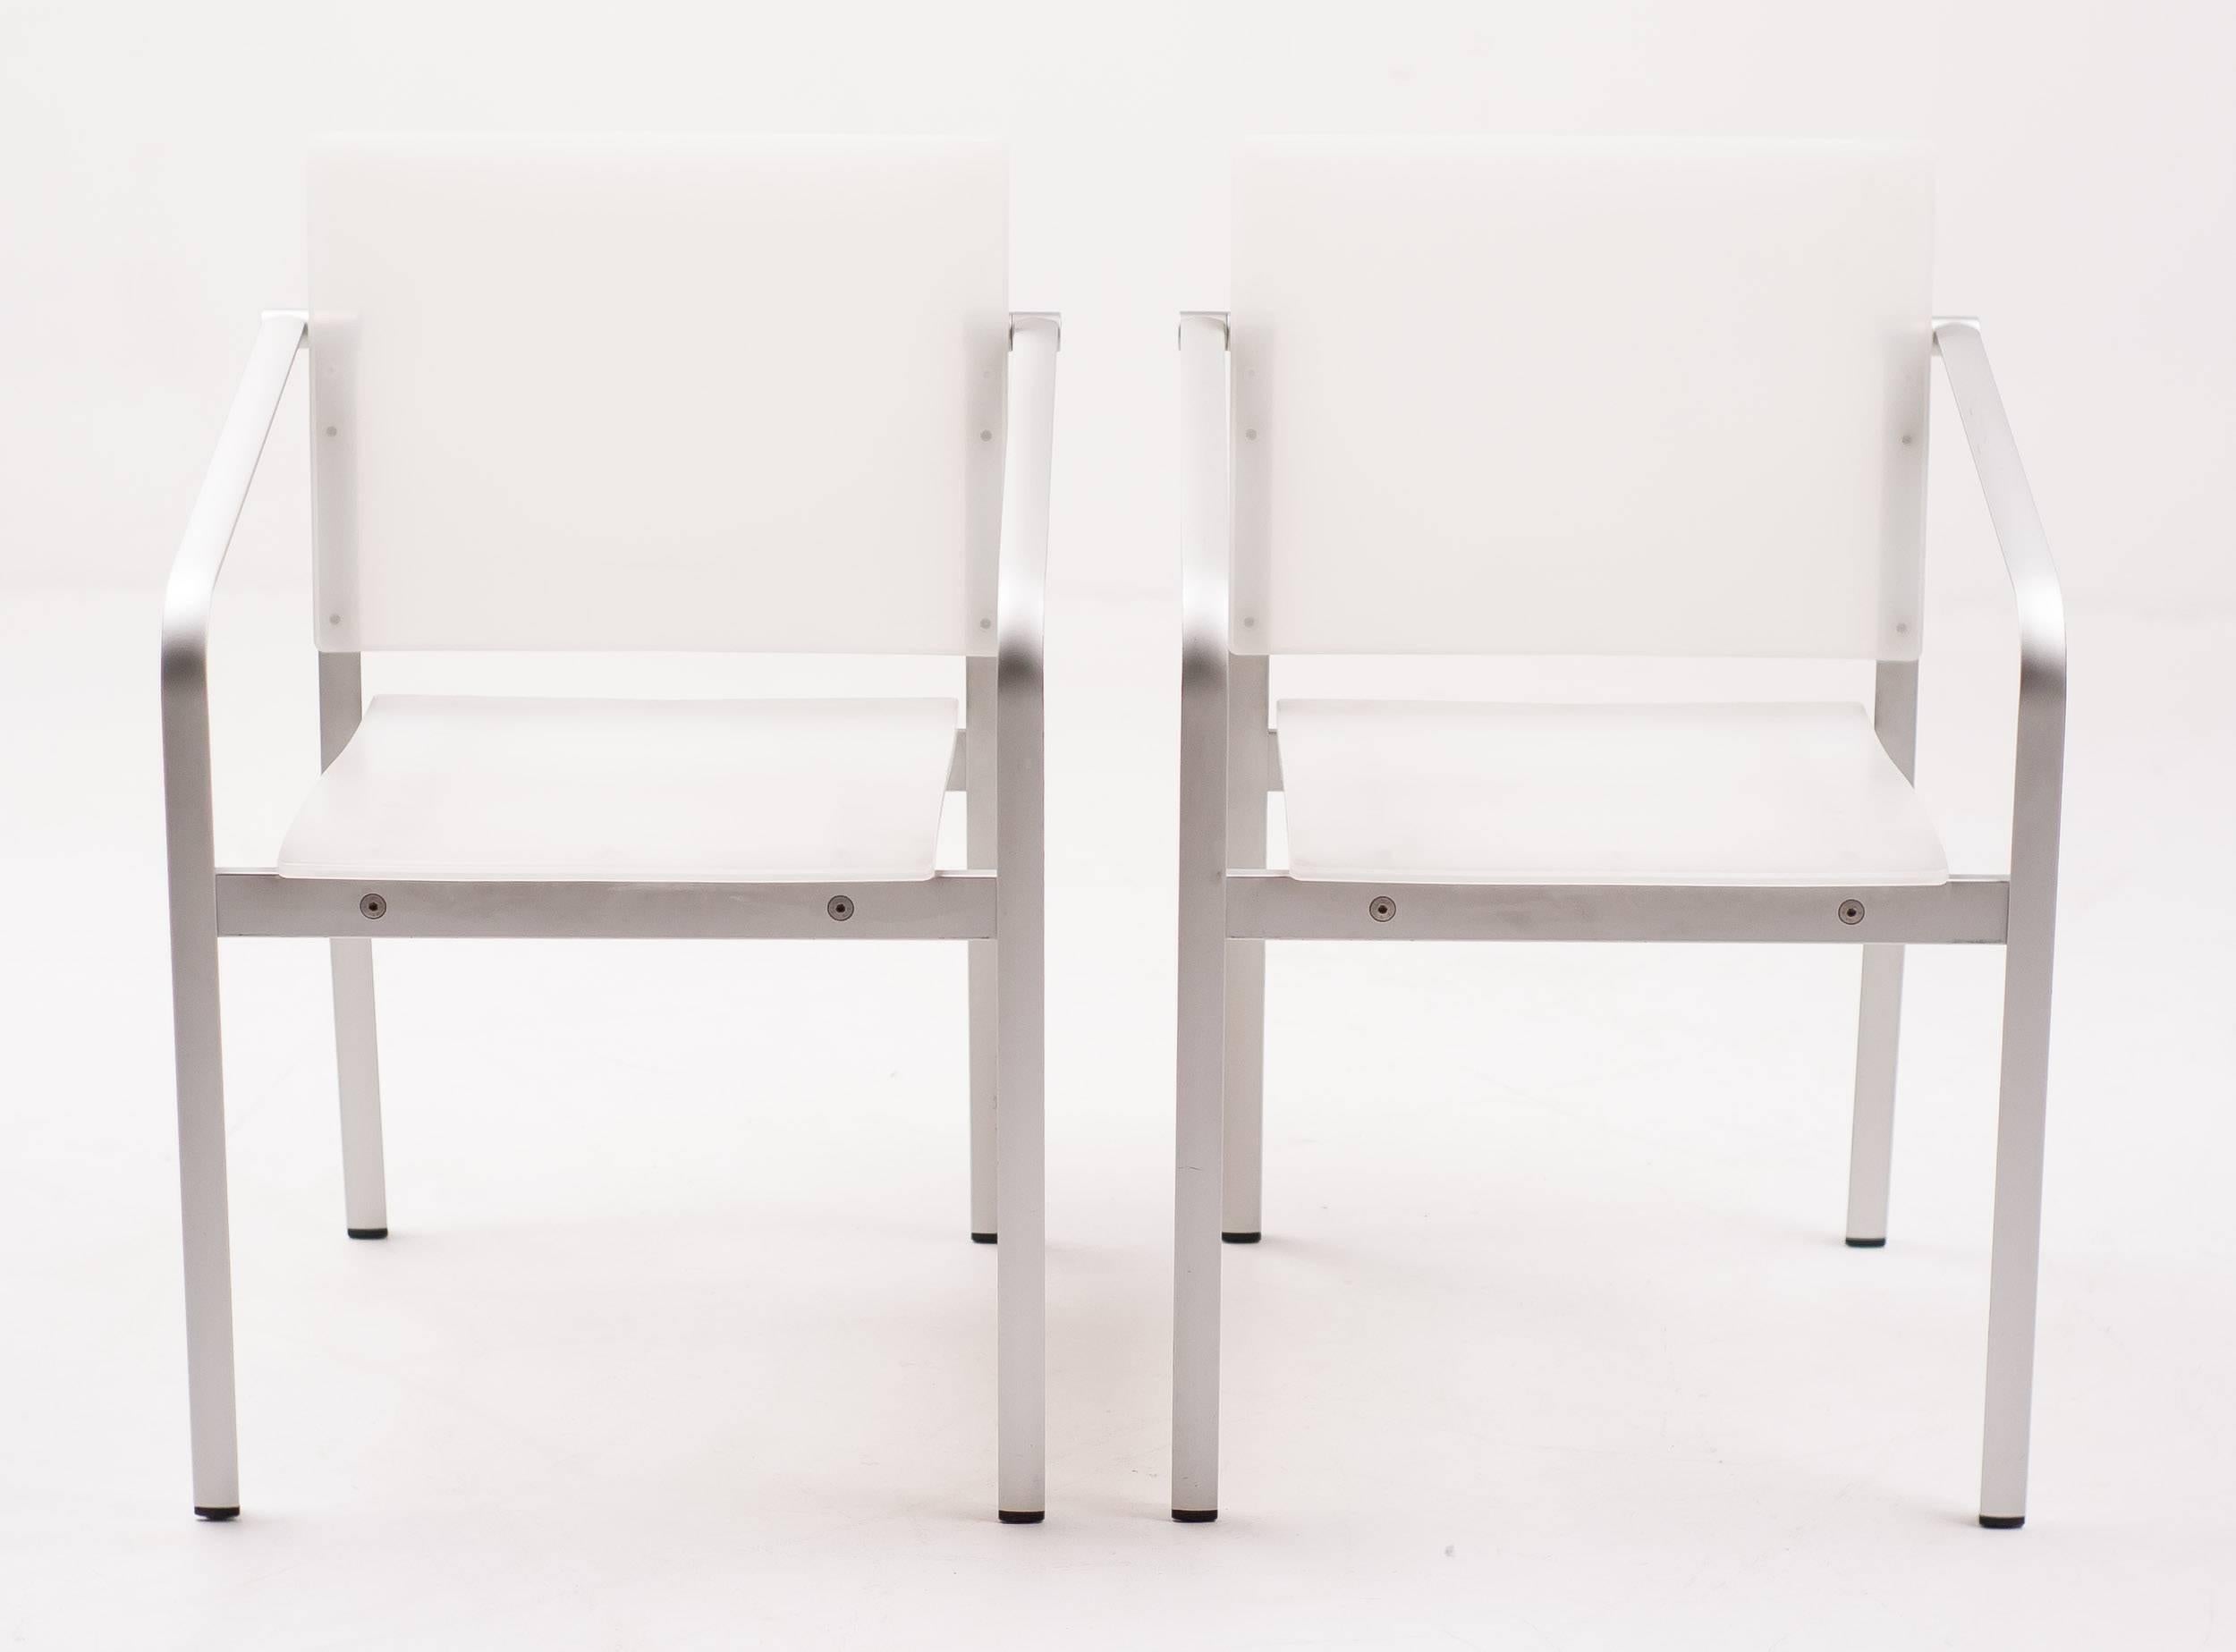 Pair of chairs designed by Sir Norman Foster & Partners for Thonet in 1997, model A900F. This version has an aluminium frame and seat and backrest in translucent white plastic. The chairs are stackable and suitable for in- and outdoor